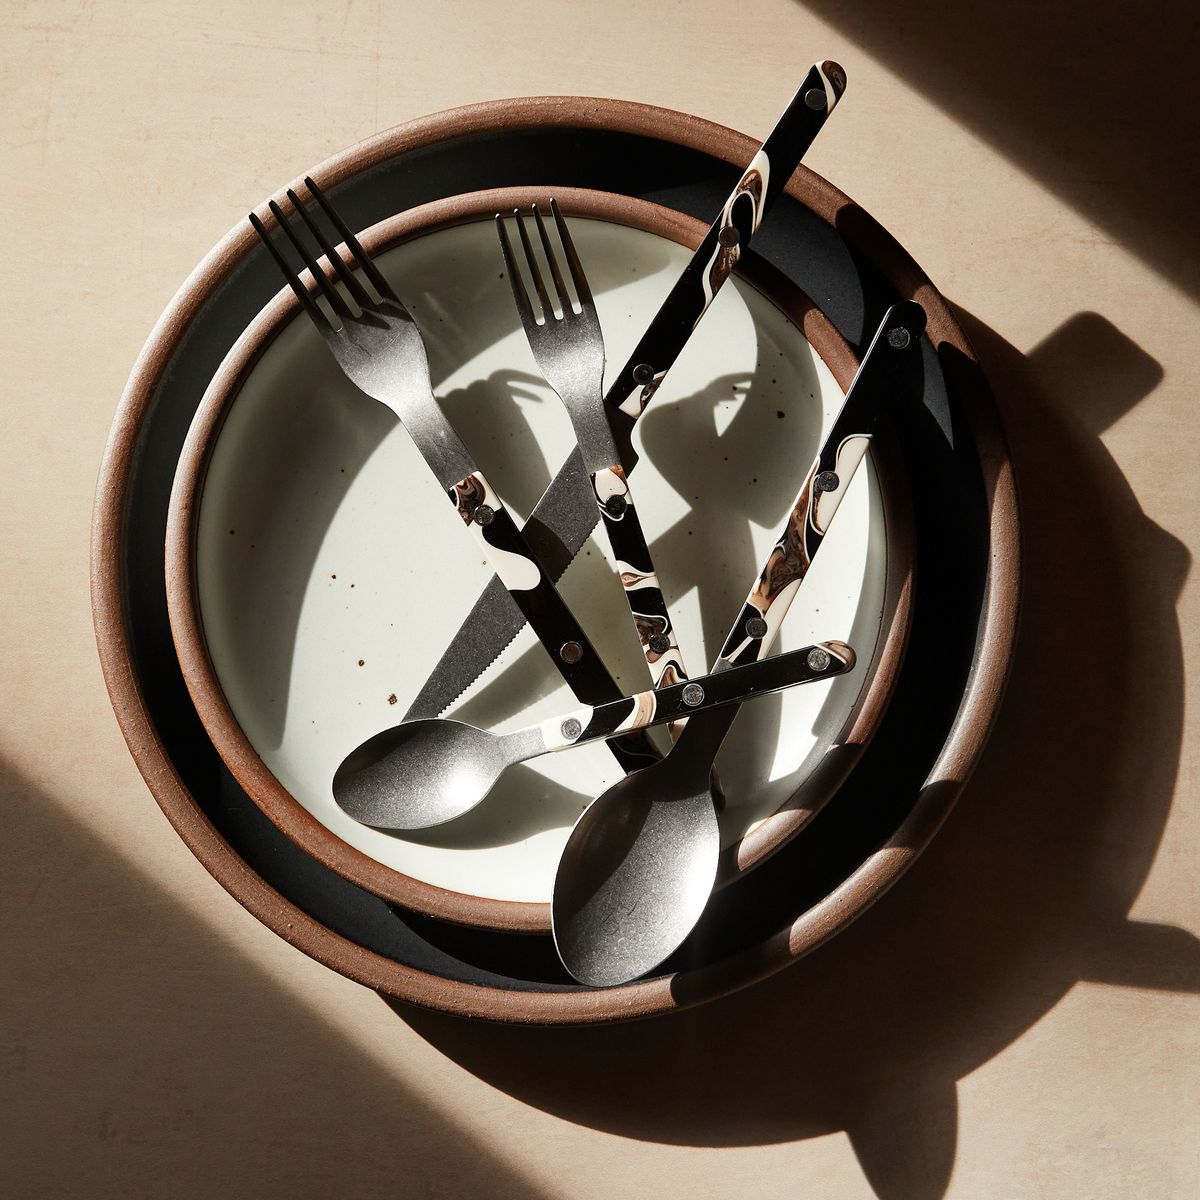 A group of black, white and cream cutlery (salad fork, dinner fork, knife, soup spoon and teaspoon) stacked on white and black bowls